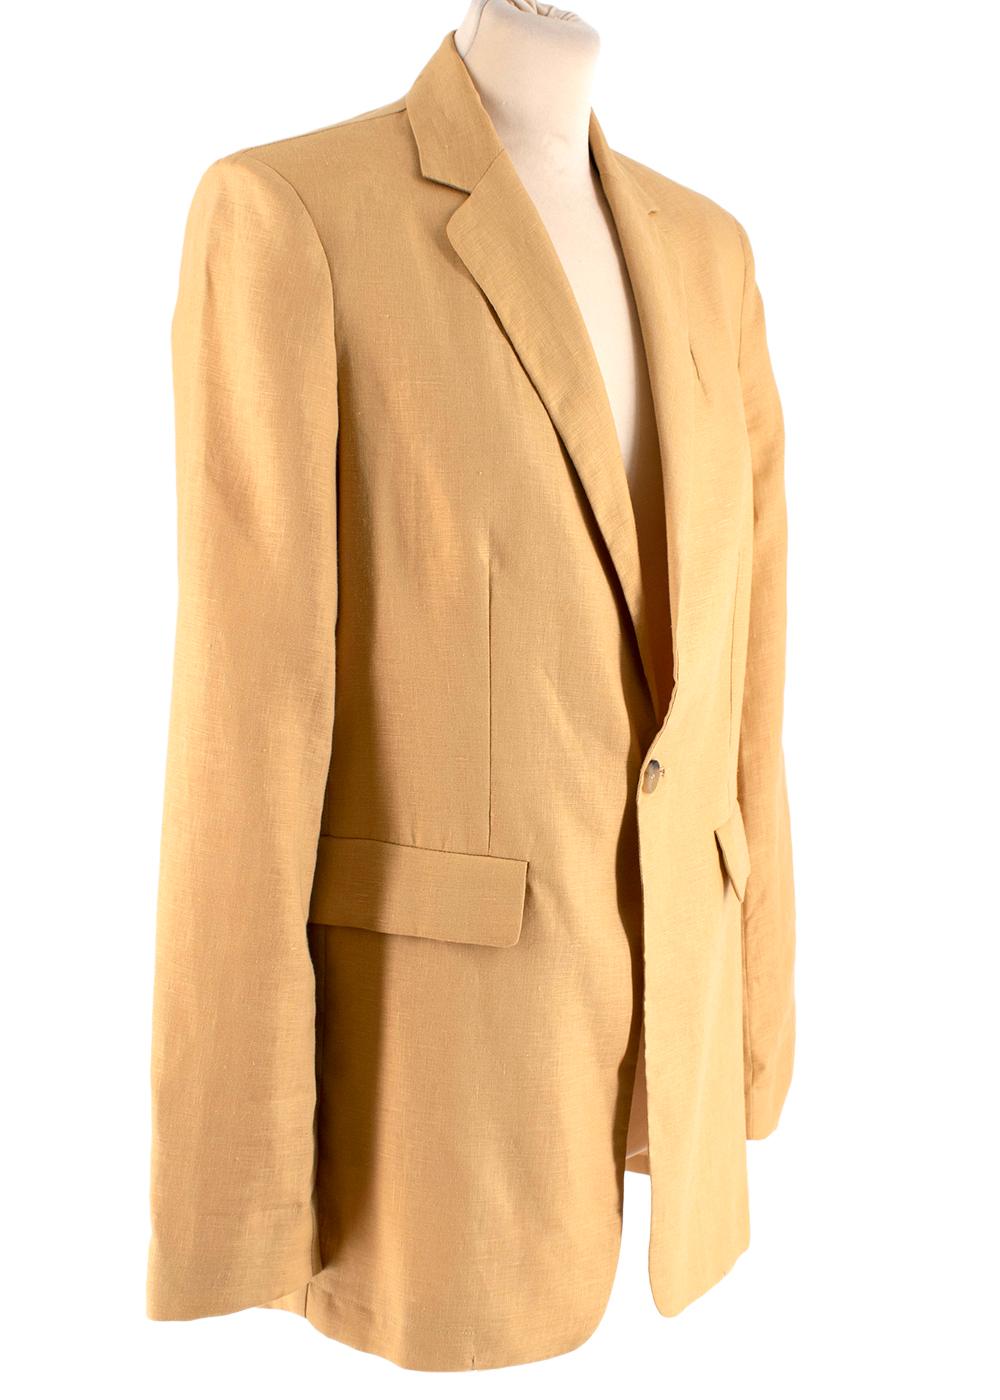 Asceno Azores Mustard Linen Blazer and Rivello High-Rise Trousers 

Ascenos Azores mustard blazer is vacation-ready take on tailoring, crafted from lightweight, breezy linen. 

- Shaped for a relaxed fit with neat notch lapels 
- Carefully tailored